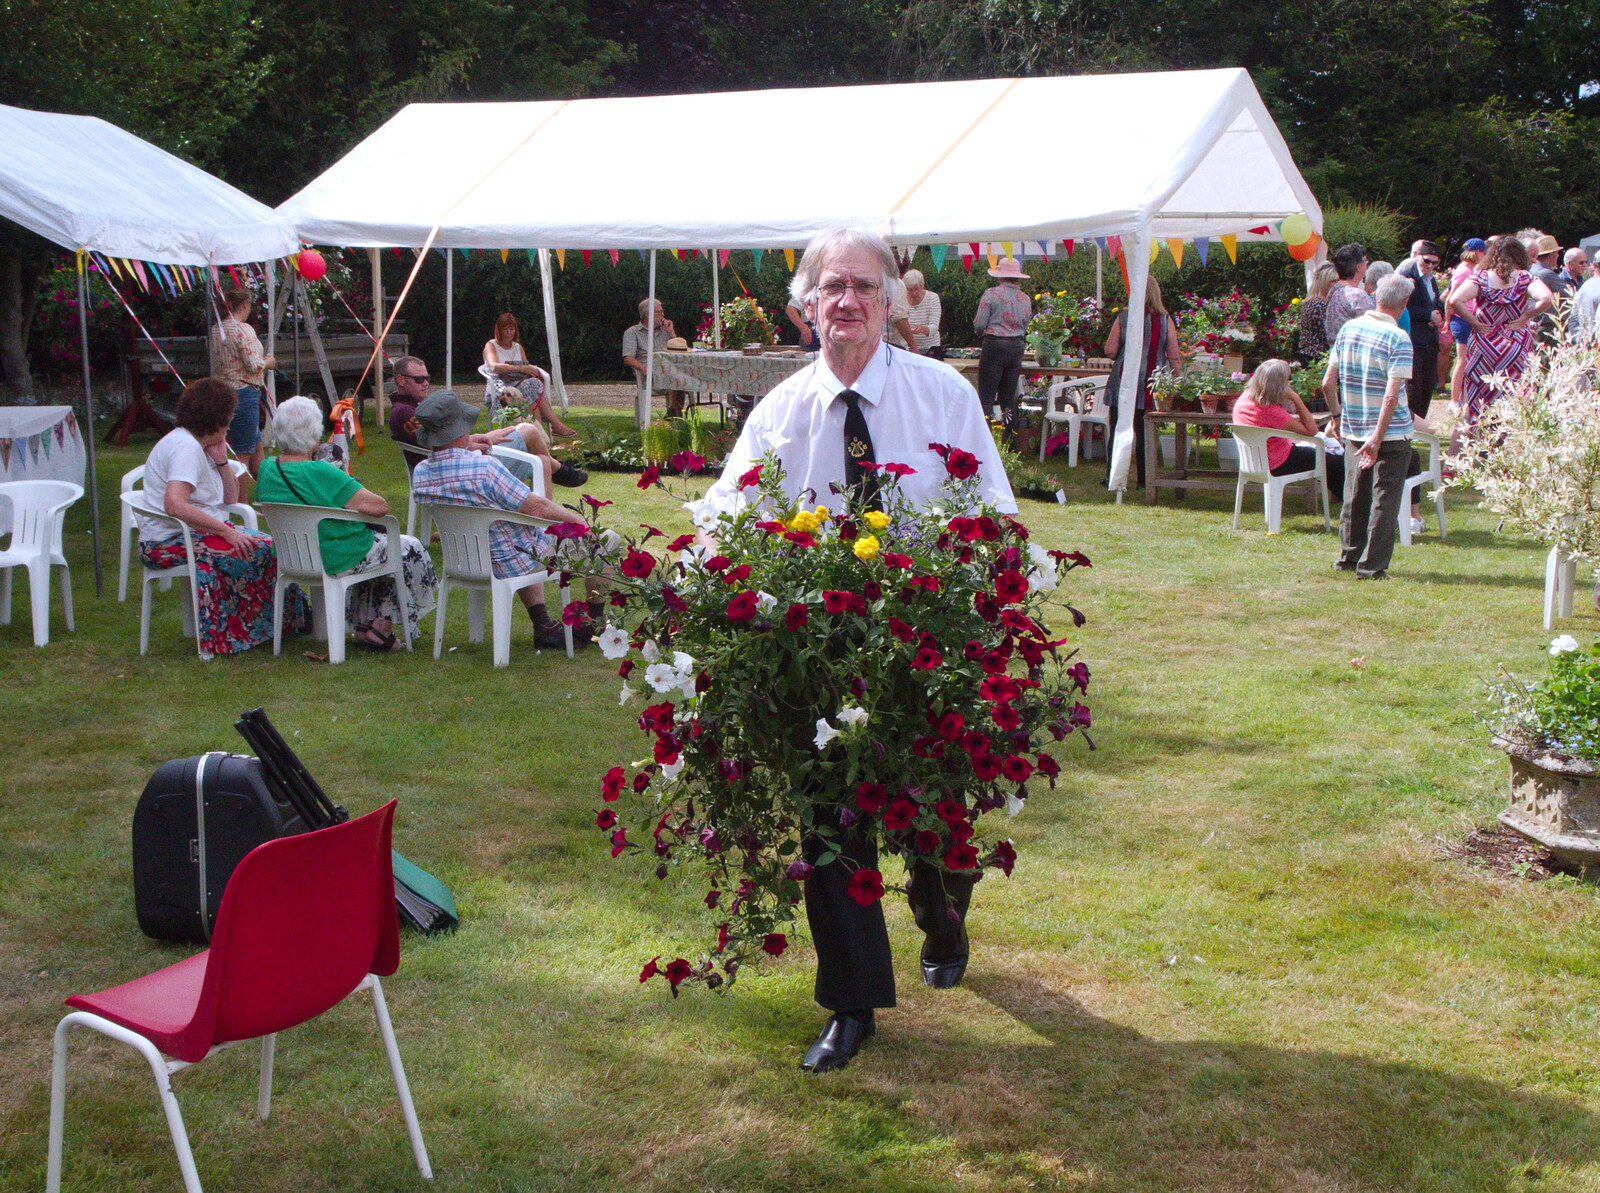 Bernard scores a big bucket of flowers from GSB at the Summer Fete, Market Weston, Suffolk - 20th July 2019